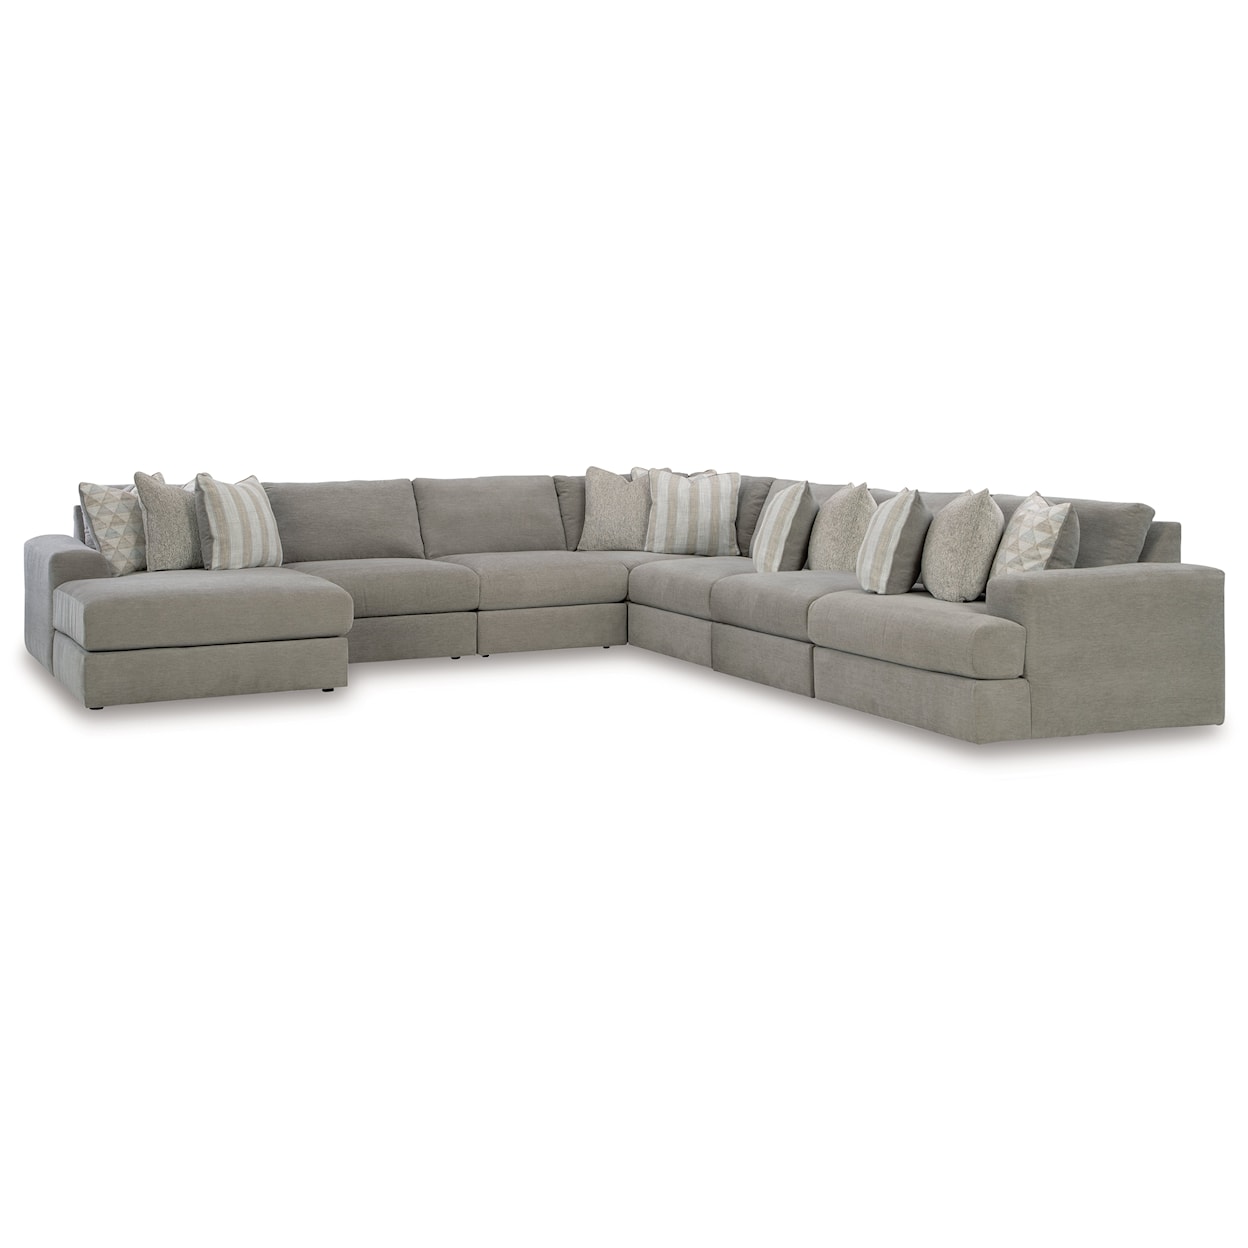 StyleLine Avaliyah 7-Piece Sectional with Chaise